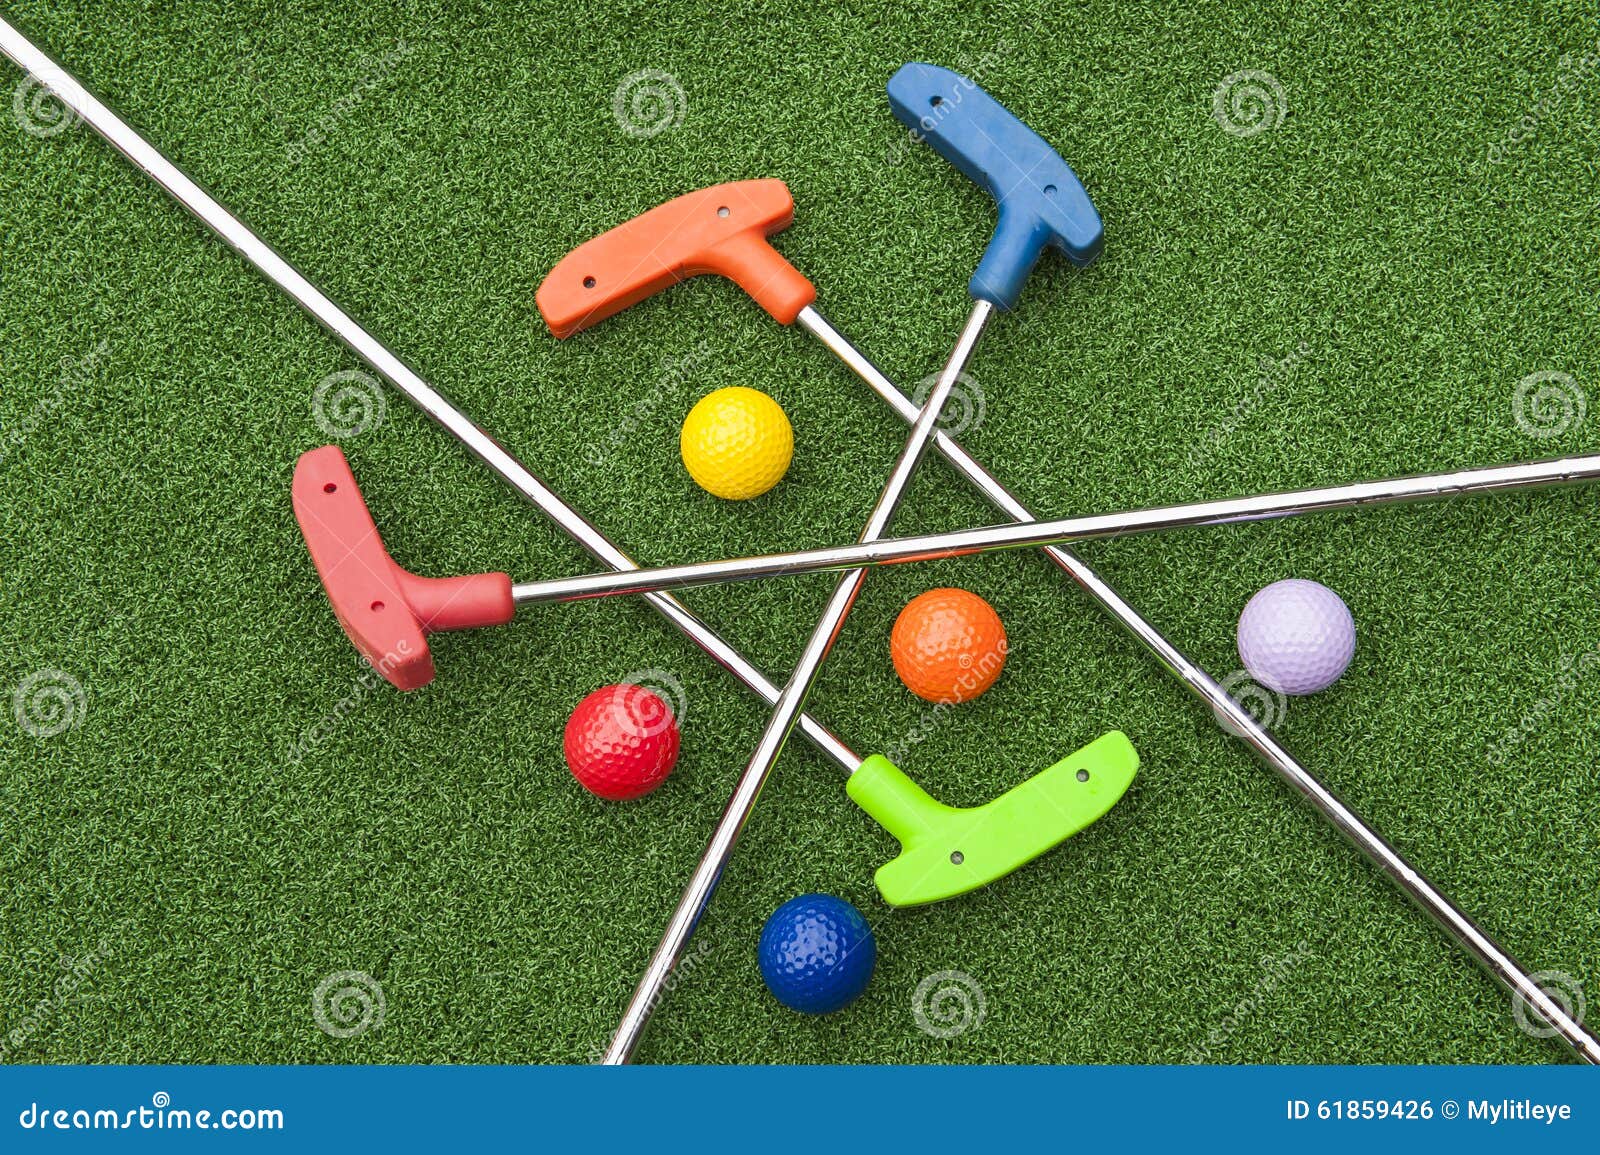 assorted miniature golf putters and balls